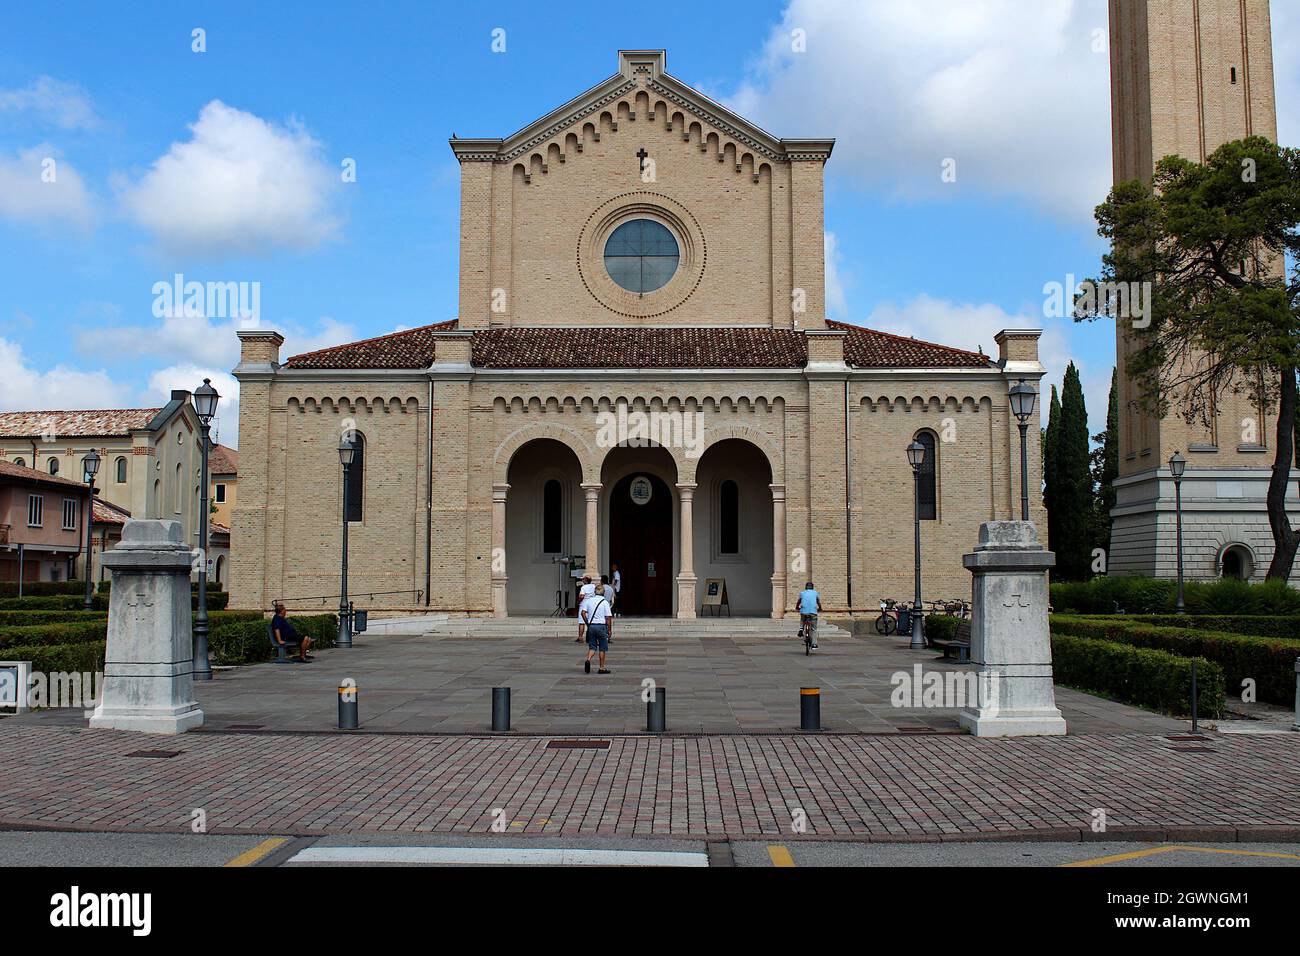 S Mauro High Resolution Stock Photography and Images - Alamy